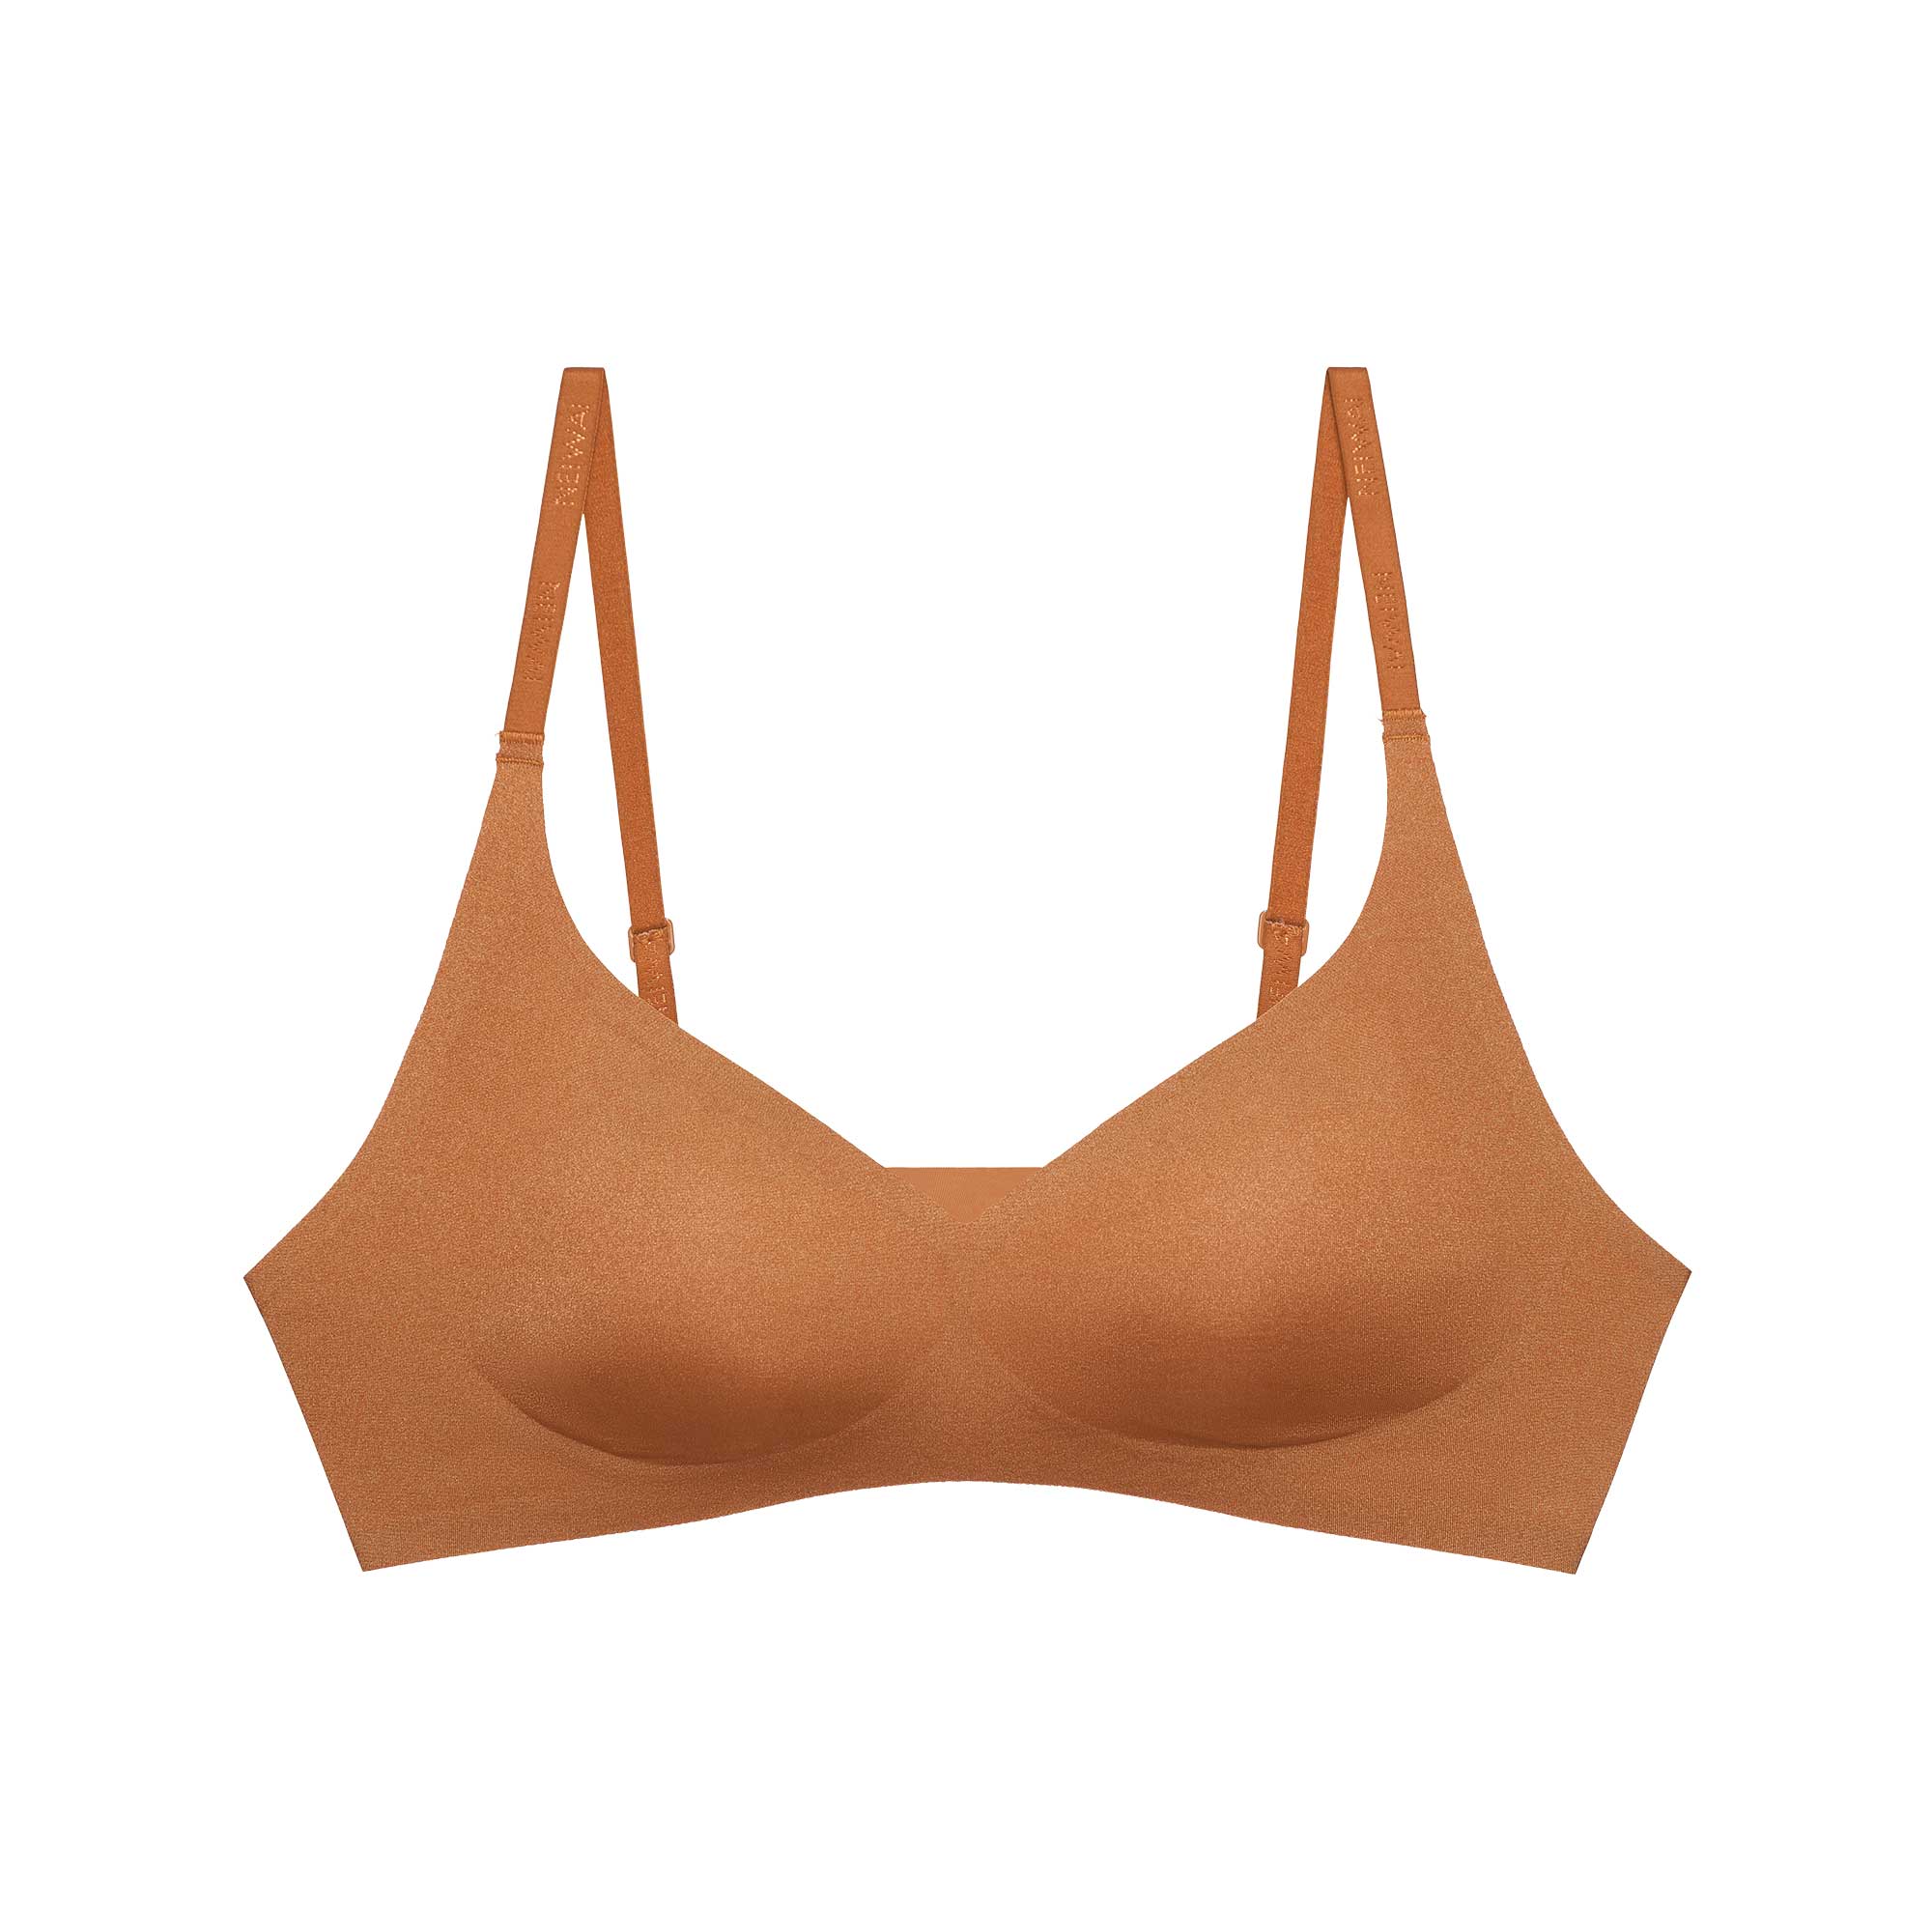 Flat lay image of an orange bra with scoop neckline and thin straps